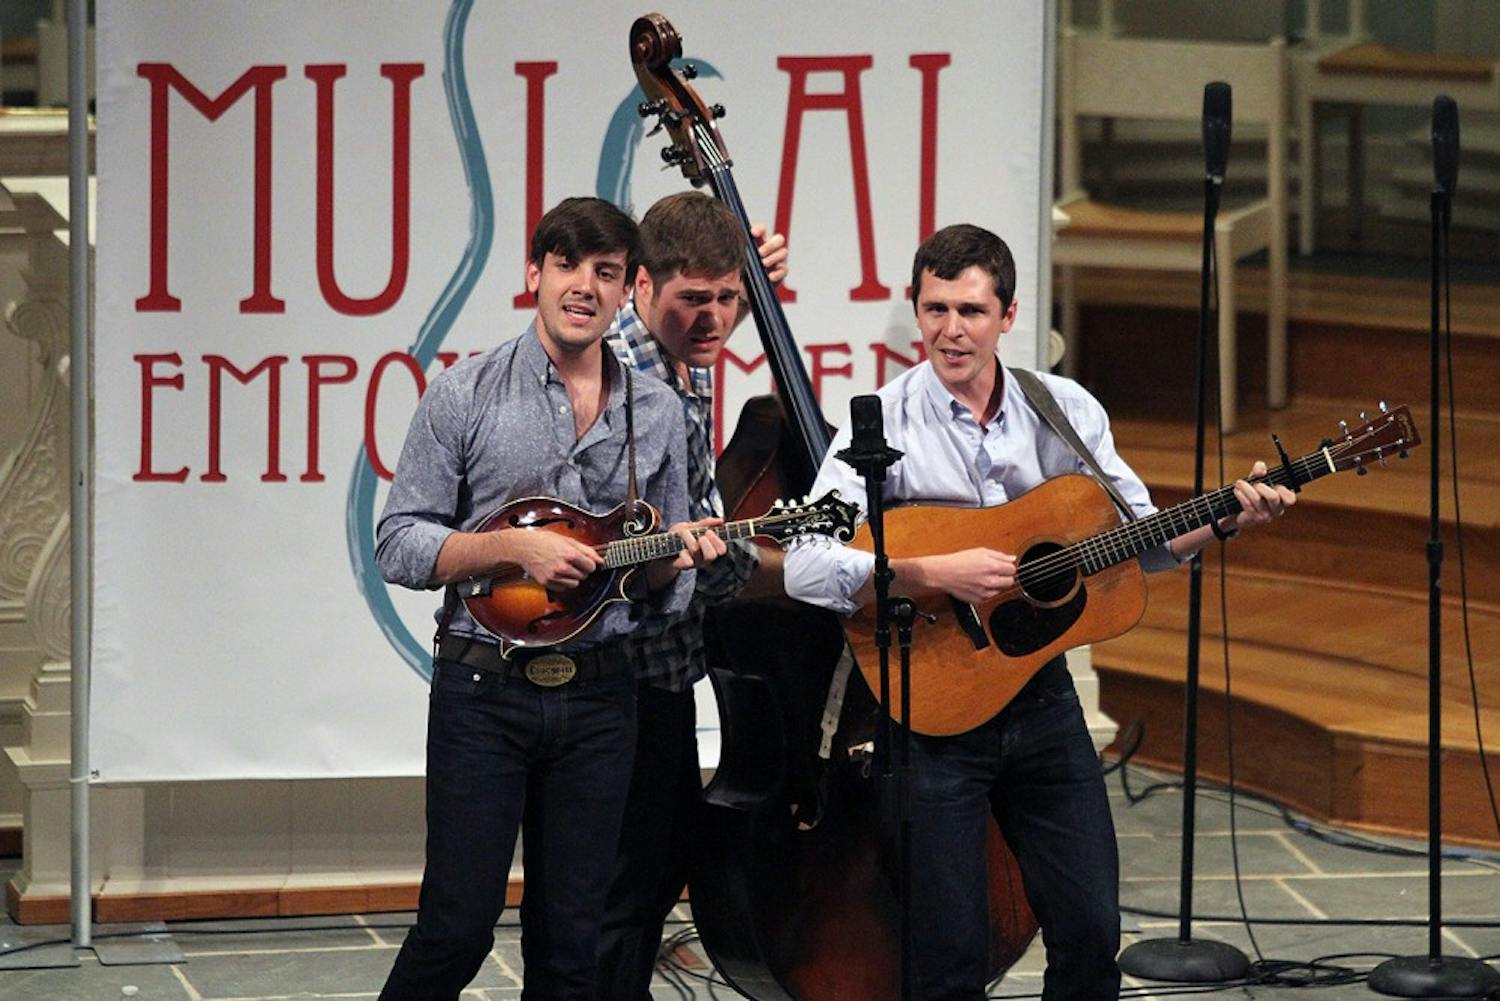 Musical Empowerment held its 2nd Annual Benefit Concert at University United Methodist Church on Tuesday. The Clef Hangers, Mipso, the Achordants, and Joe Kwon, Scott Avett, Seth Avett, Paul Defiglia and Tania Elizabeth of The Avett Brothers performed to raise money for Musical Empowerment. 